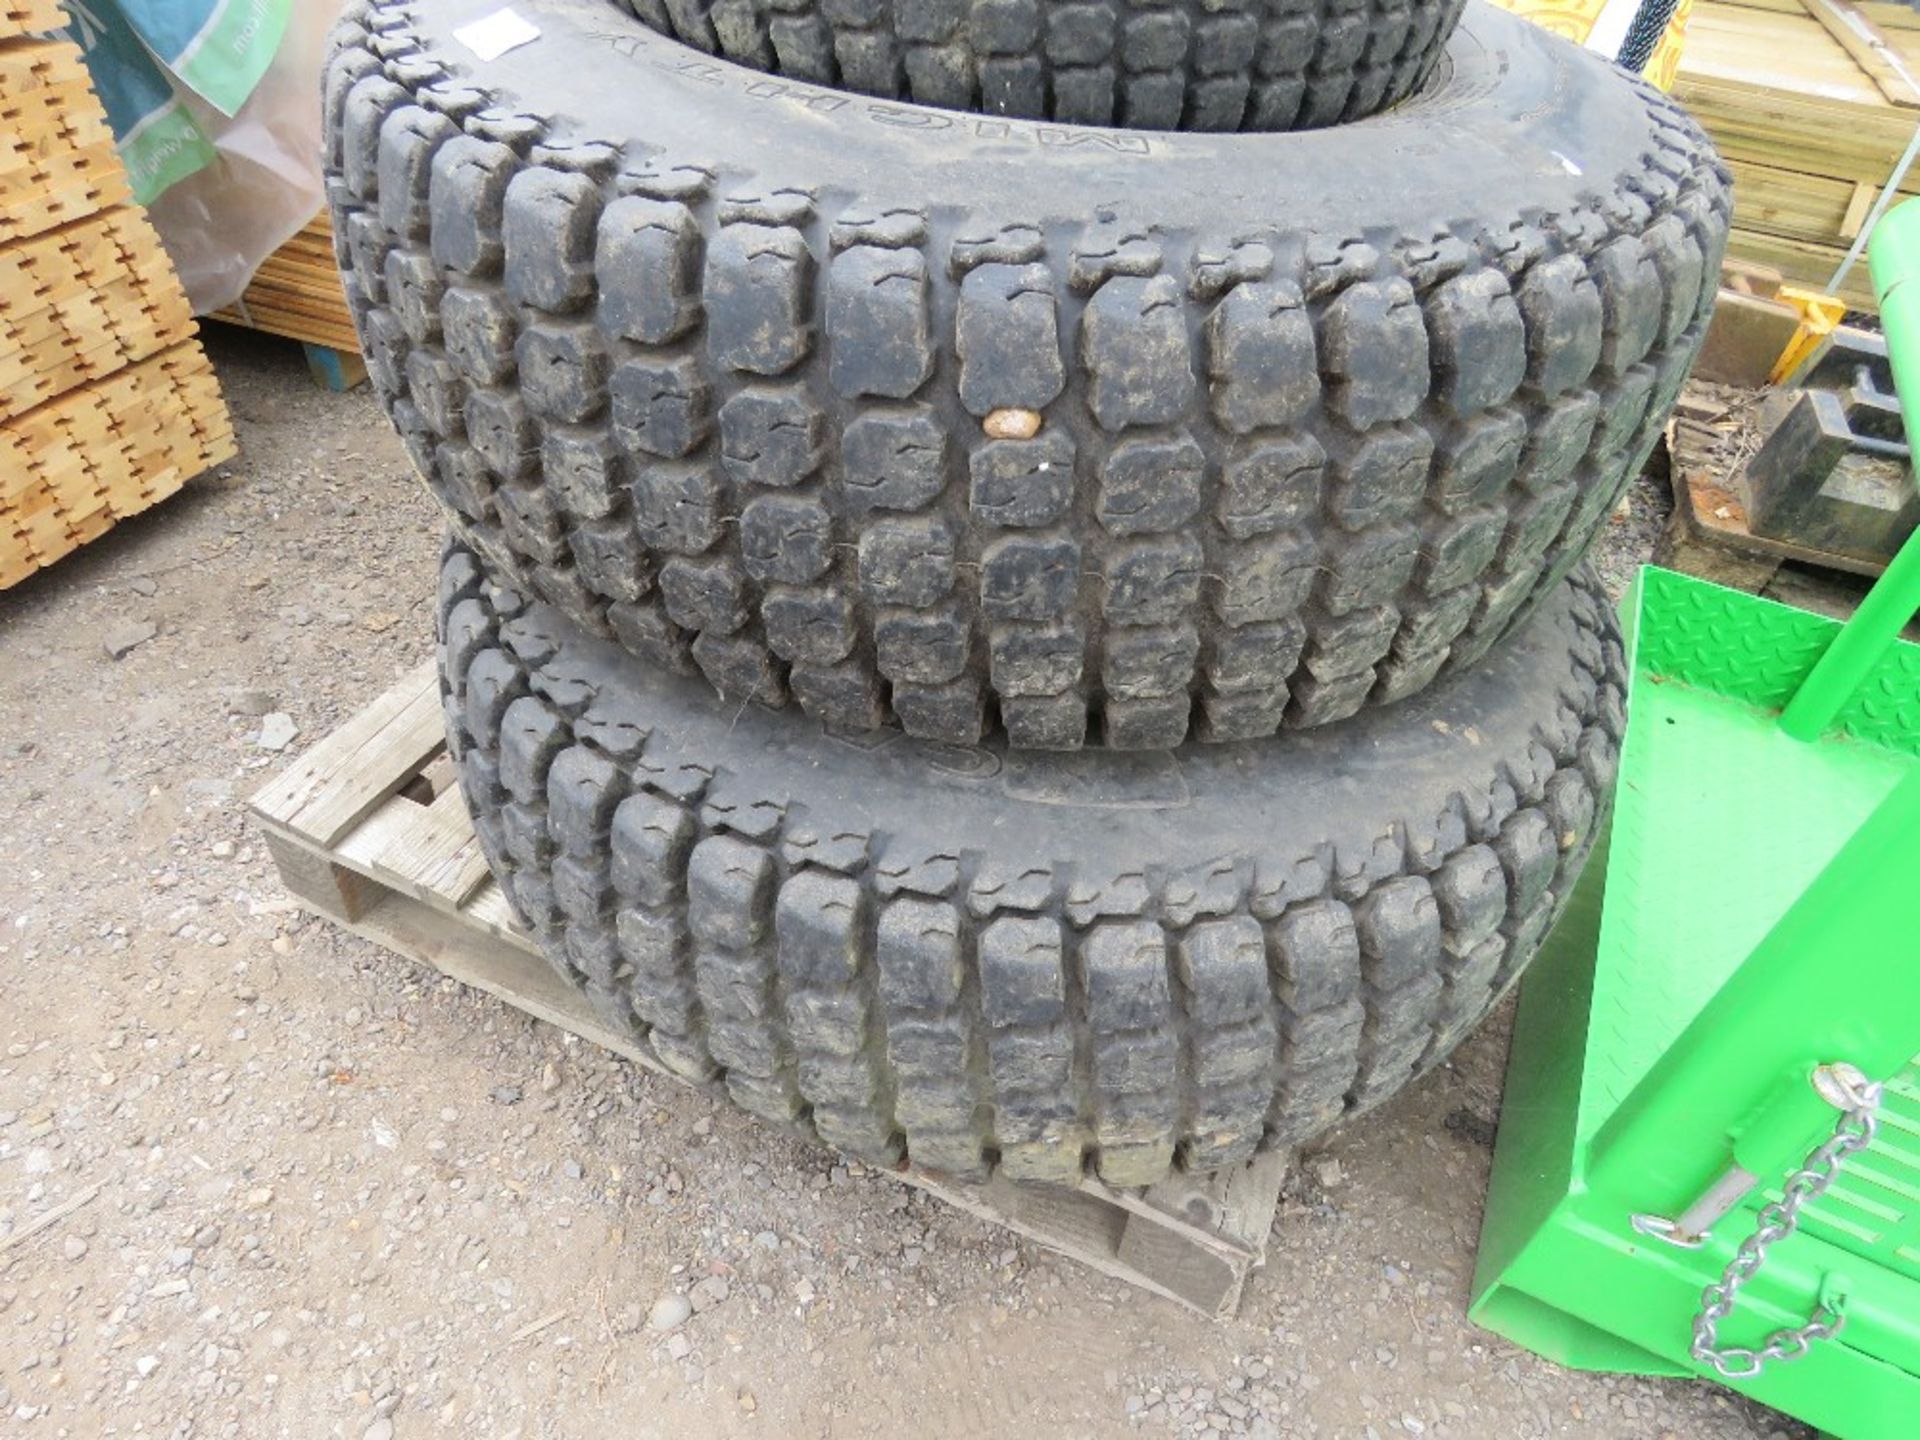 SET OF GRASSLAND WHEELS AND TYRES, BELIVED FROM JOHN DEERE TRACTOR. 2@41X14.00-20 PLUS 2@ 27X8.50-15 - Image 5 of 5